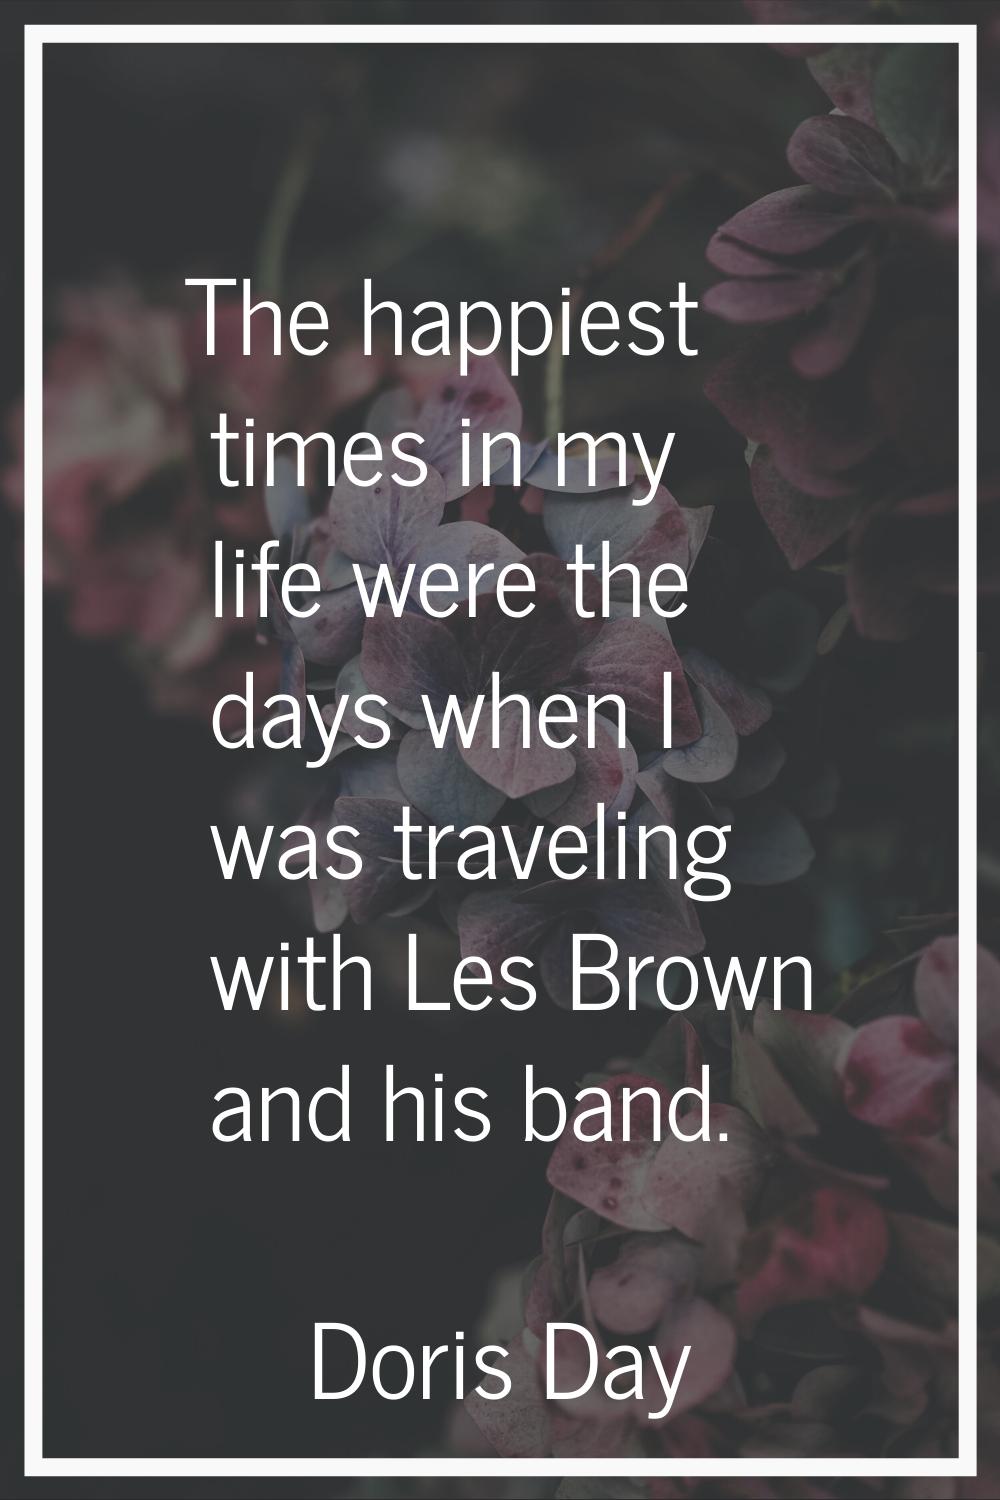 The happiest times in my life were the days when I was traveling with Les Brown and his band.